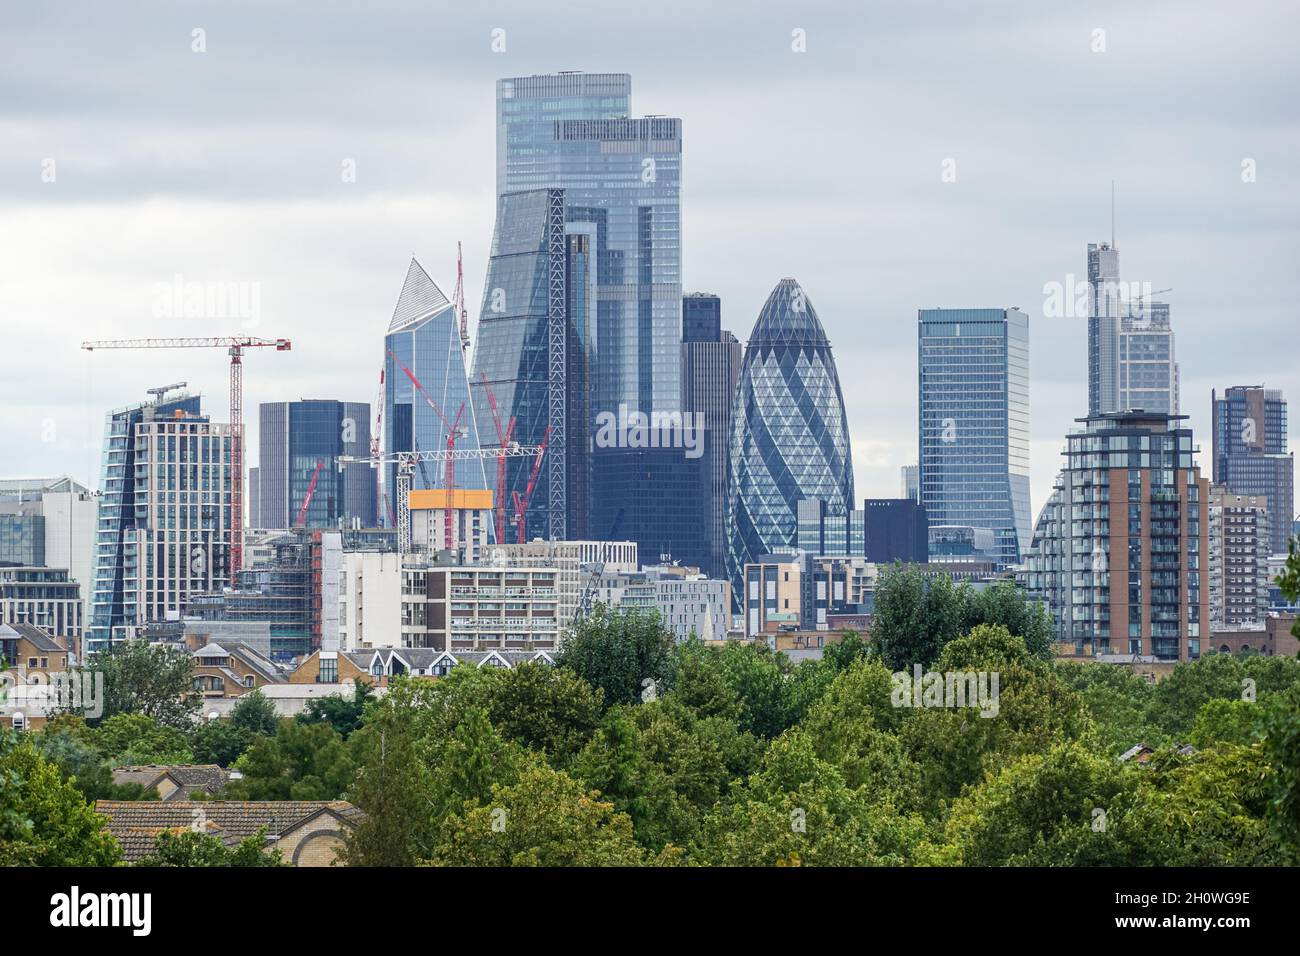 Skyscrapers in the City of London, England United Kingdom UK Stock Photo